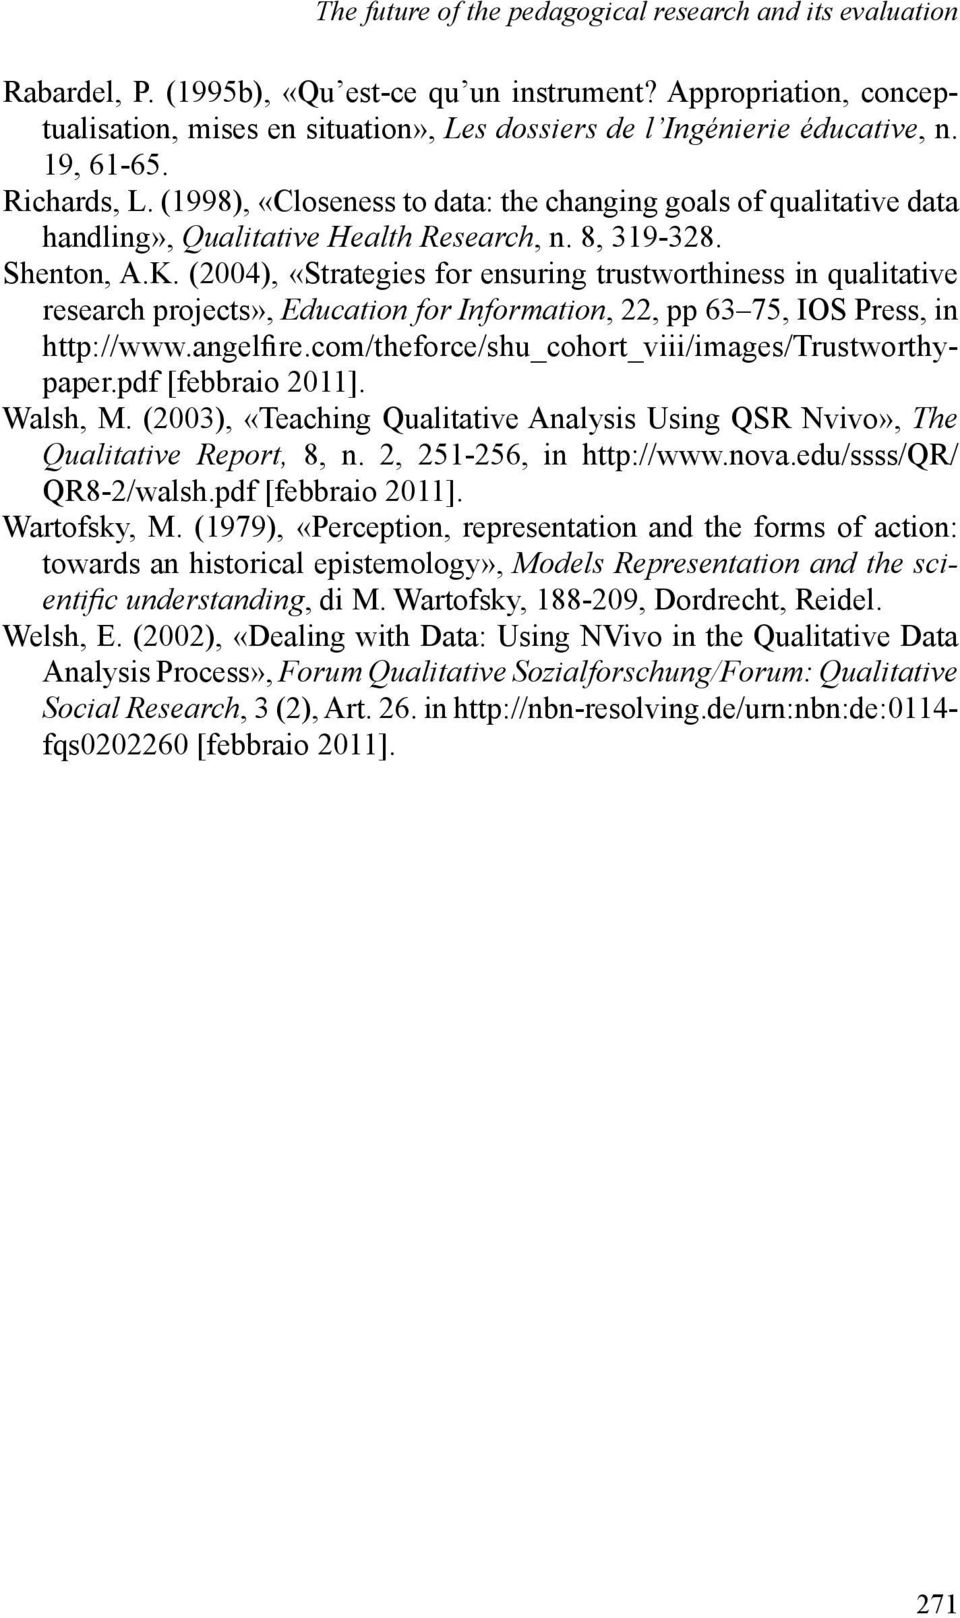 (2004), «Strategies for ensuring trustworthiness in qualitative research projects», Education for Information, 22, pp 63 75, IOS Press, in http://www.angelfi re.